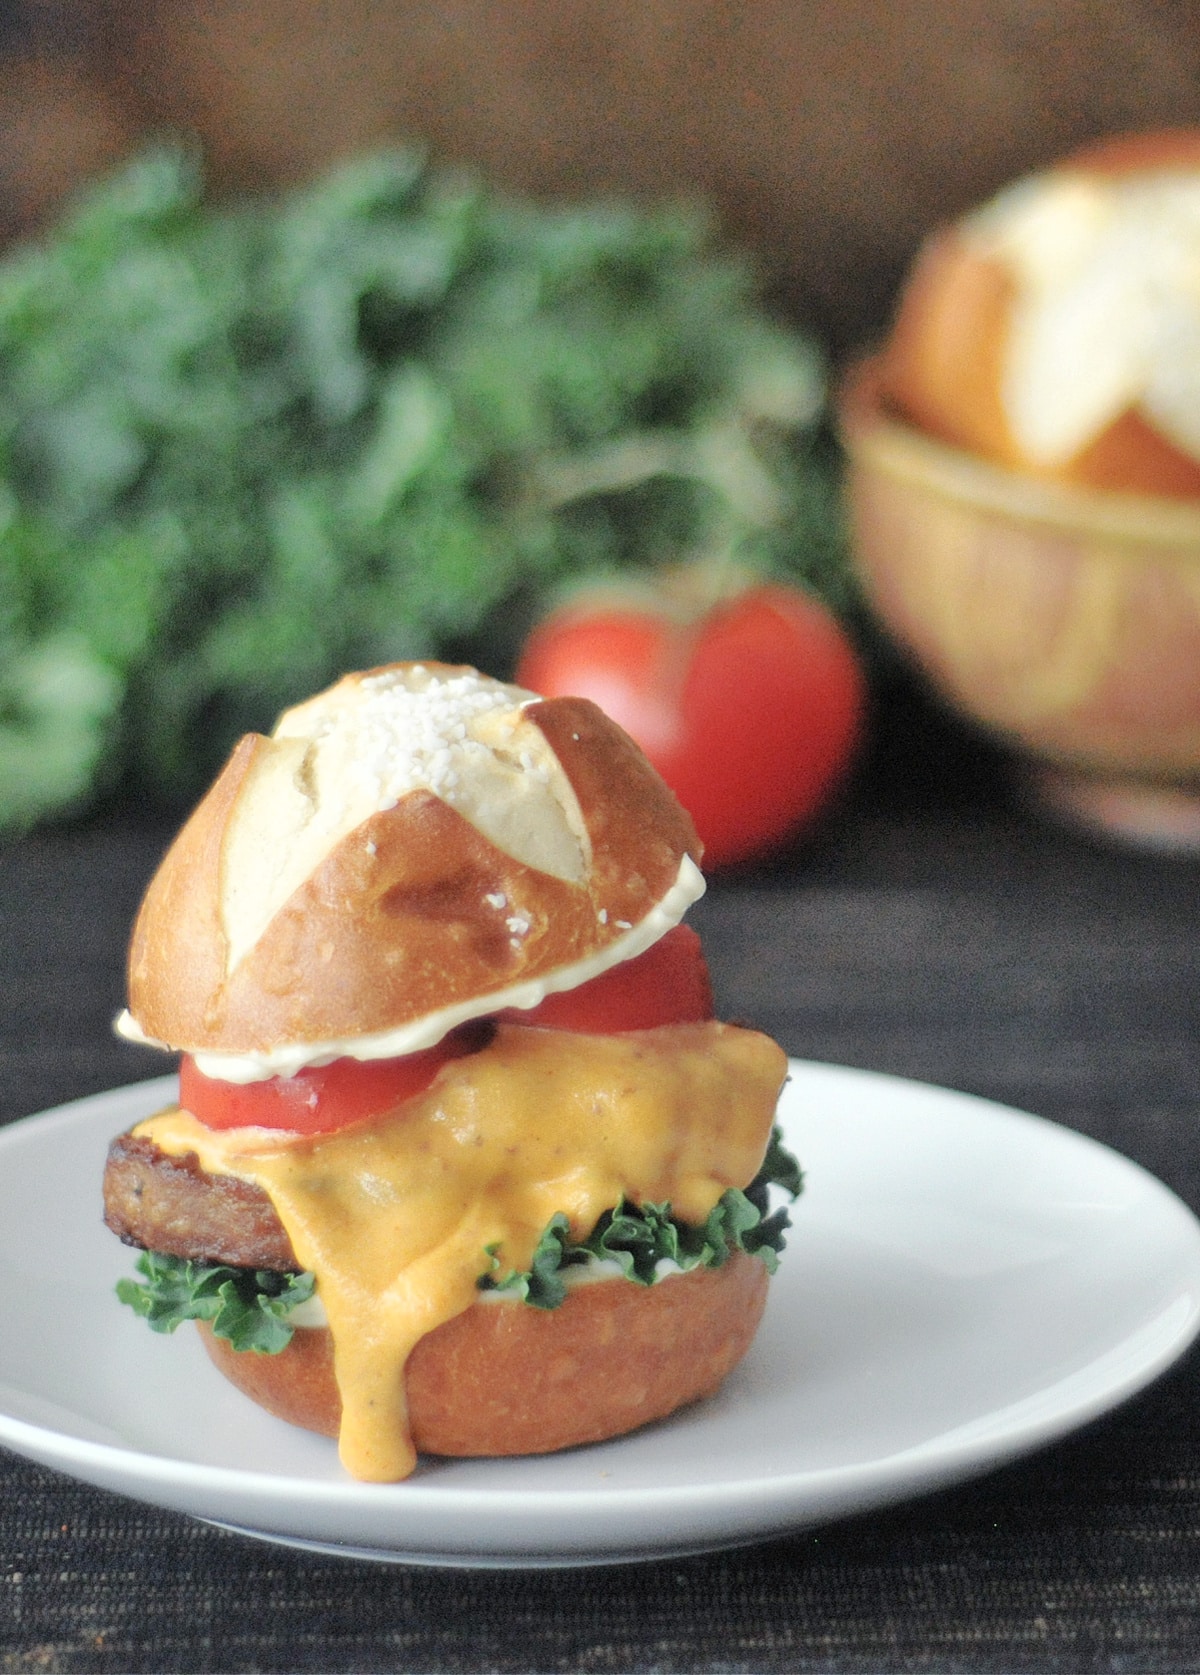 A pretzel bun veggie burger slider sits on a white plate. The slider has kale, tomato slices, and a vegan cheese sauce dripping down the side. A large bunch of kale, one whole tomato, and a bowl of pretzel buns are blurred in the background.